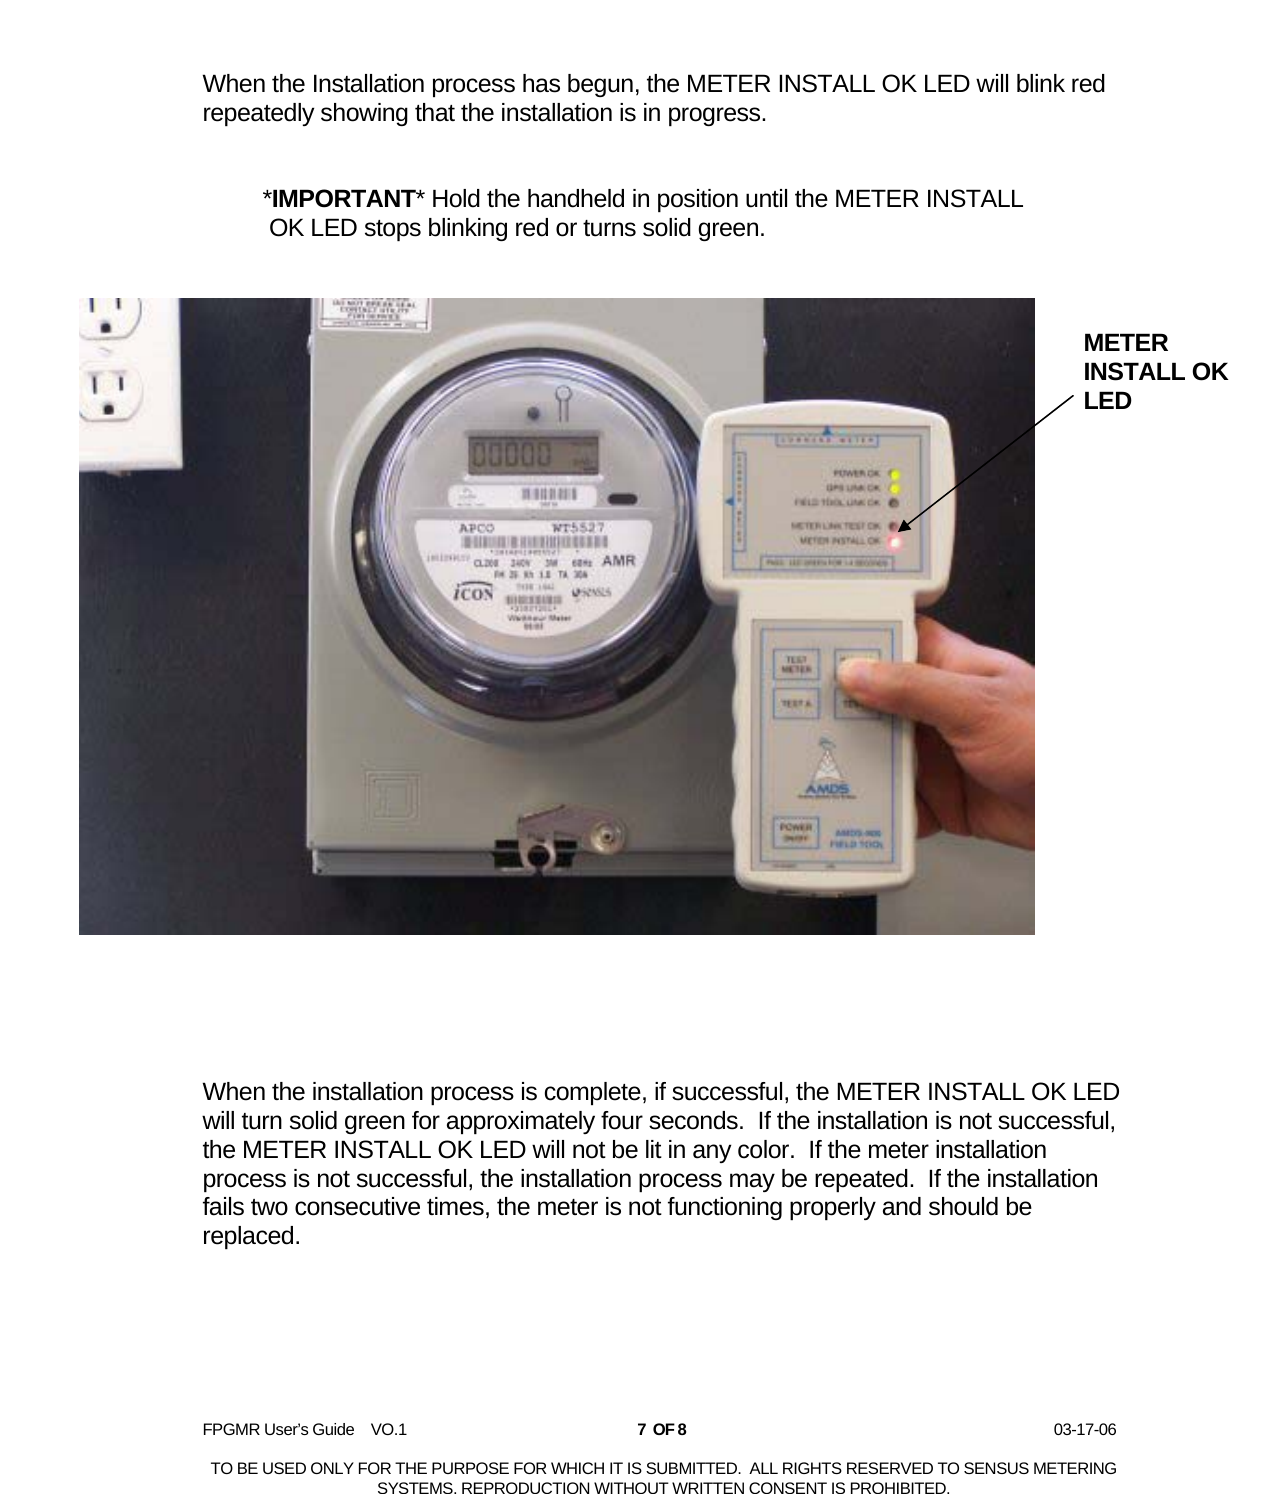  FPGMR User’s Guide    VO.1       7  OF 8                    03-17-06  TO BE USED ONLY FOR THE PURPOSE FOR WHICH IT IS SUBMITTED.  ALL RIGHTS RESERVED TO SENSUS METERING SYSTEMS. REPRODUCTION WITHOUT WRITTEN CONSENT IS PROHIBITED. When the Installation process has begun, the METER INSTALL OK LED will blink red repeatedly showing that the installation is in progress.    *IMPORTANT* Hold the handheld in position until the METER INSTALL    OK LED stops blinking red or turns solid green.         When the installation process is complete, if successful, the METER INSTALL OK LED will turn solid green for approximately four seconds.  If the installation is not successful, the METER INSTALL OK LED will not be lit in any color.  If the meter installation process is not successful, the installation process may be repeated.  If the installation fails two consecutive times, the meter is not functioning properly and should be replaced.       METER INSTALL OK LED 